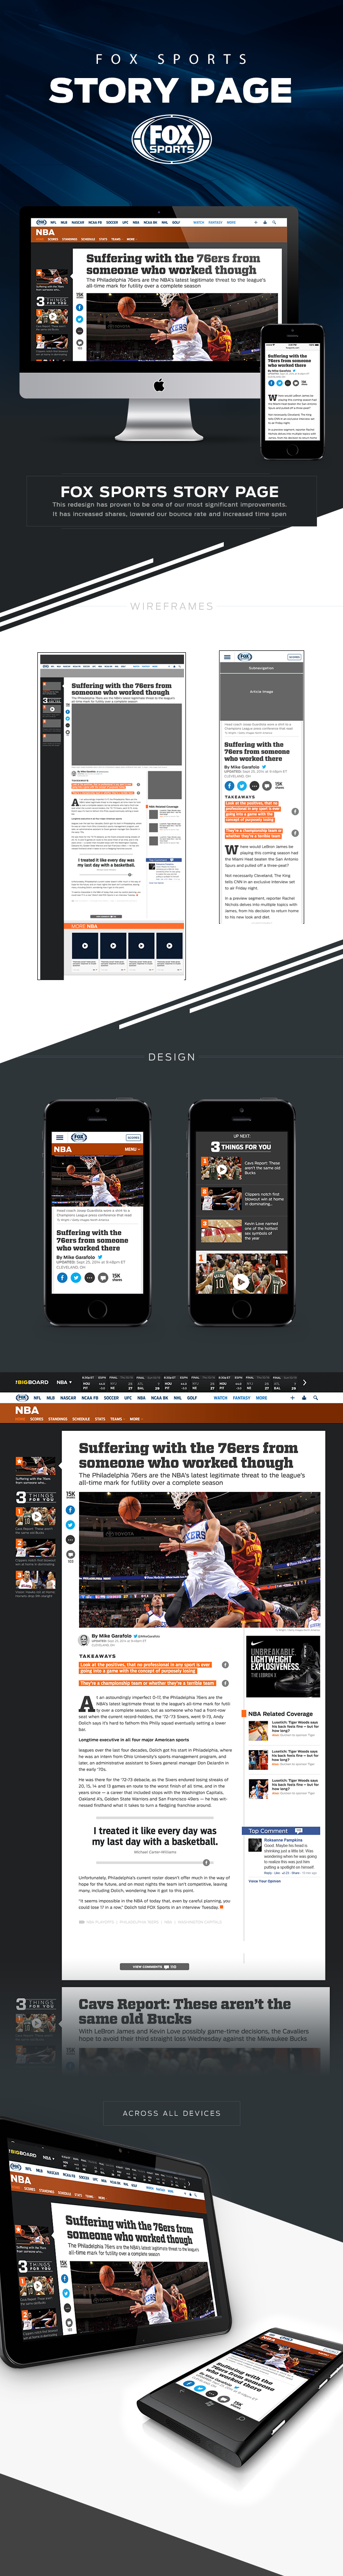 sports Fox Sports Social Sharing redesign story page